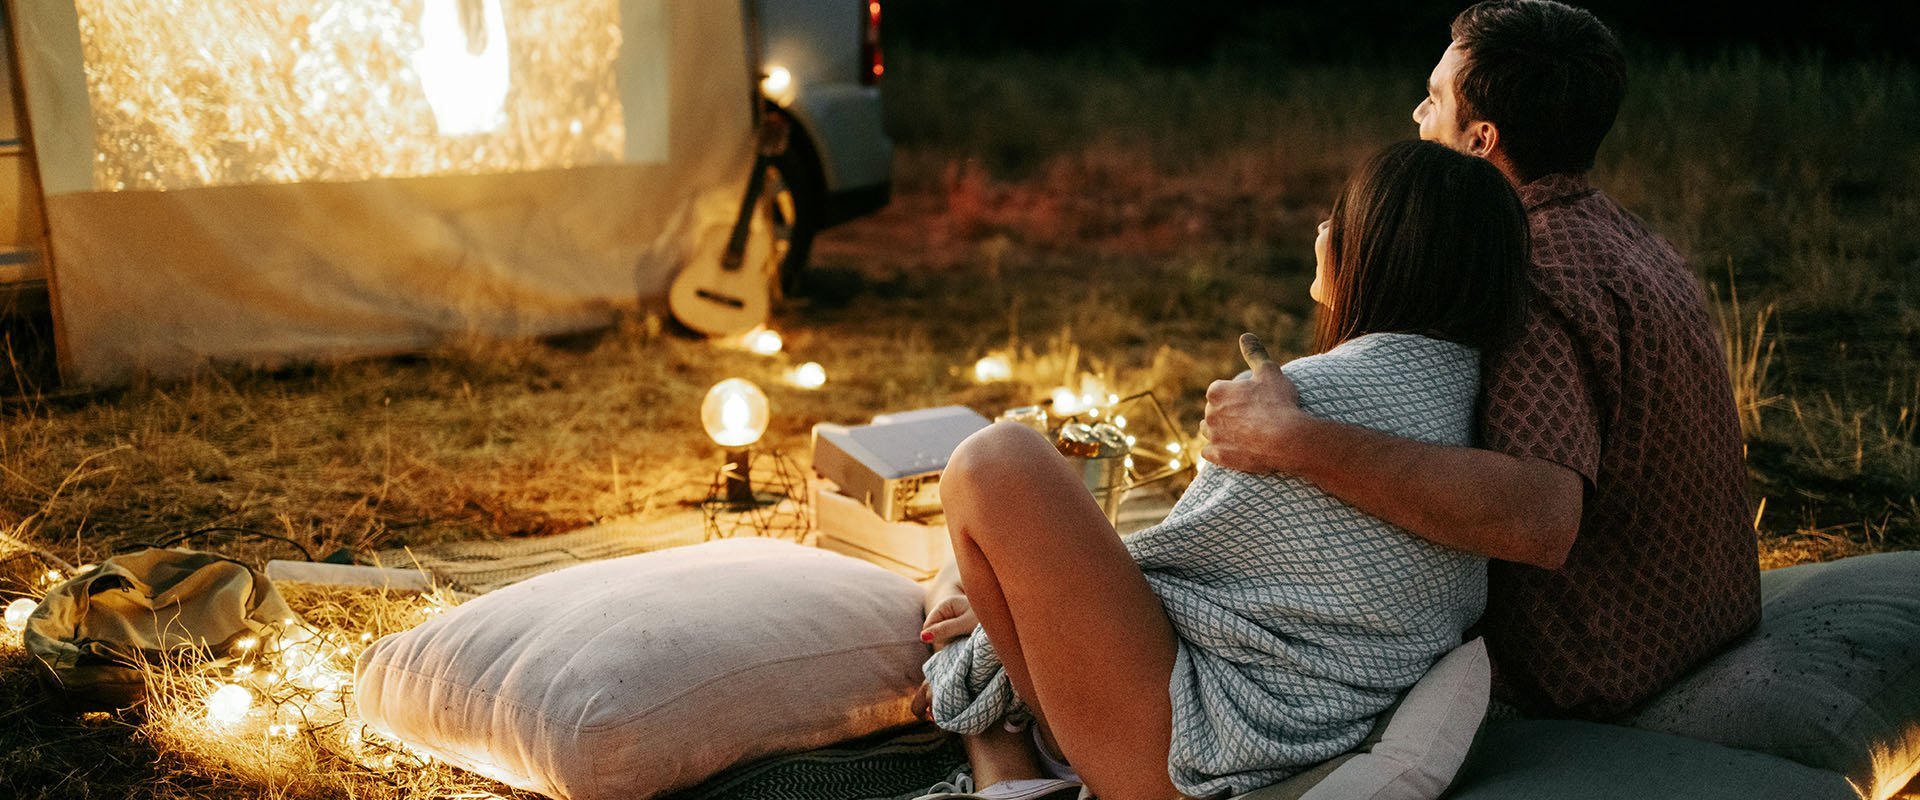 Man and woman have an outdoor date and watch a movie as an example of date ideas